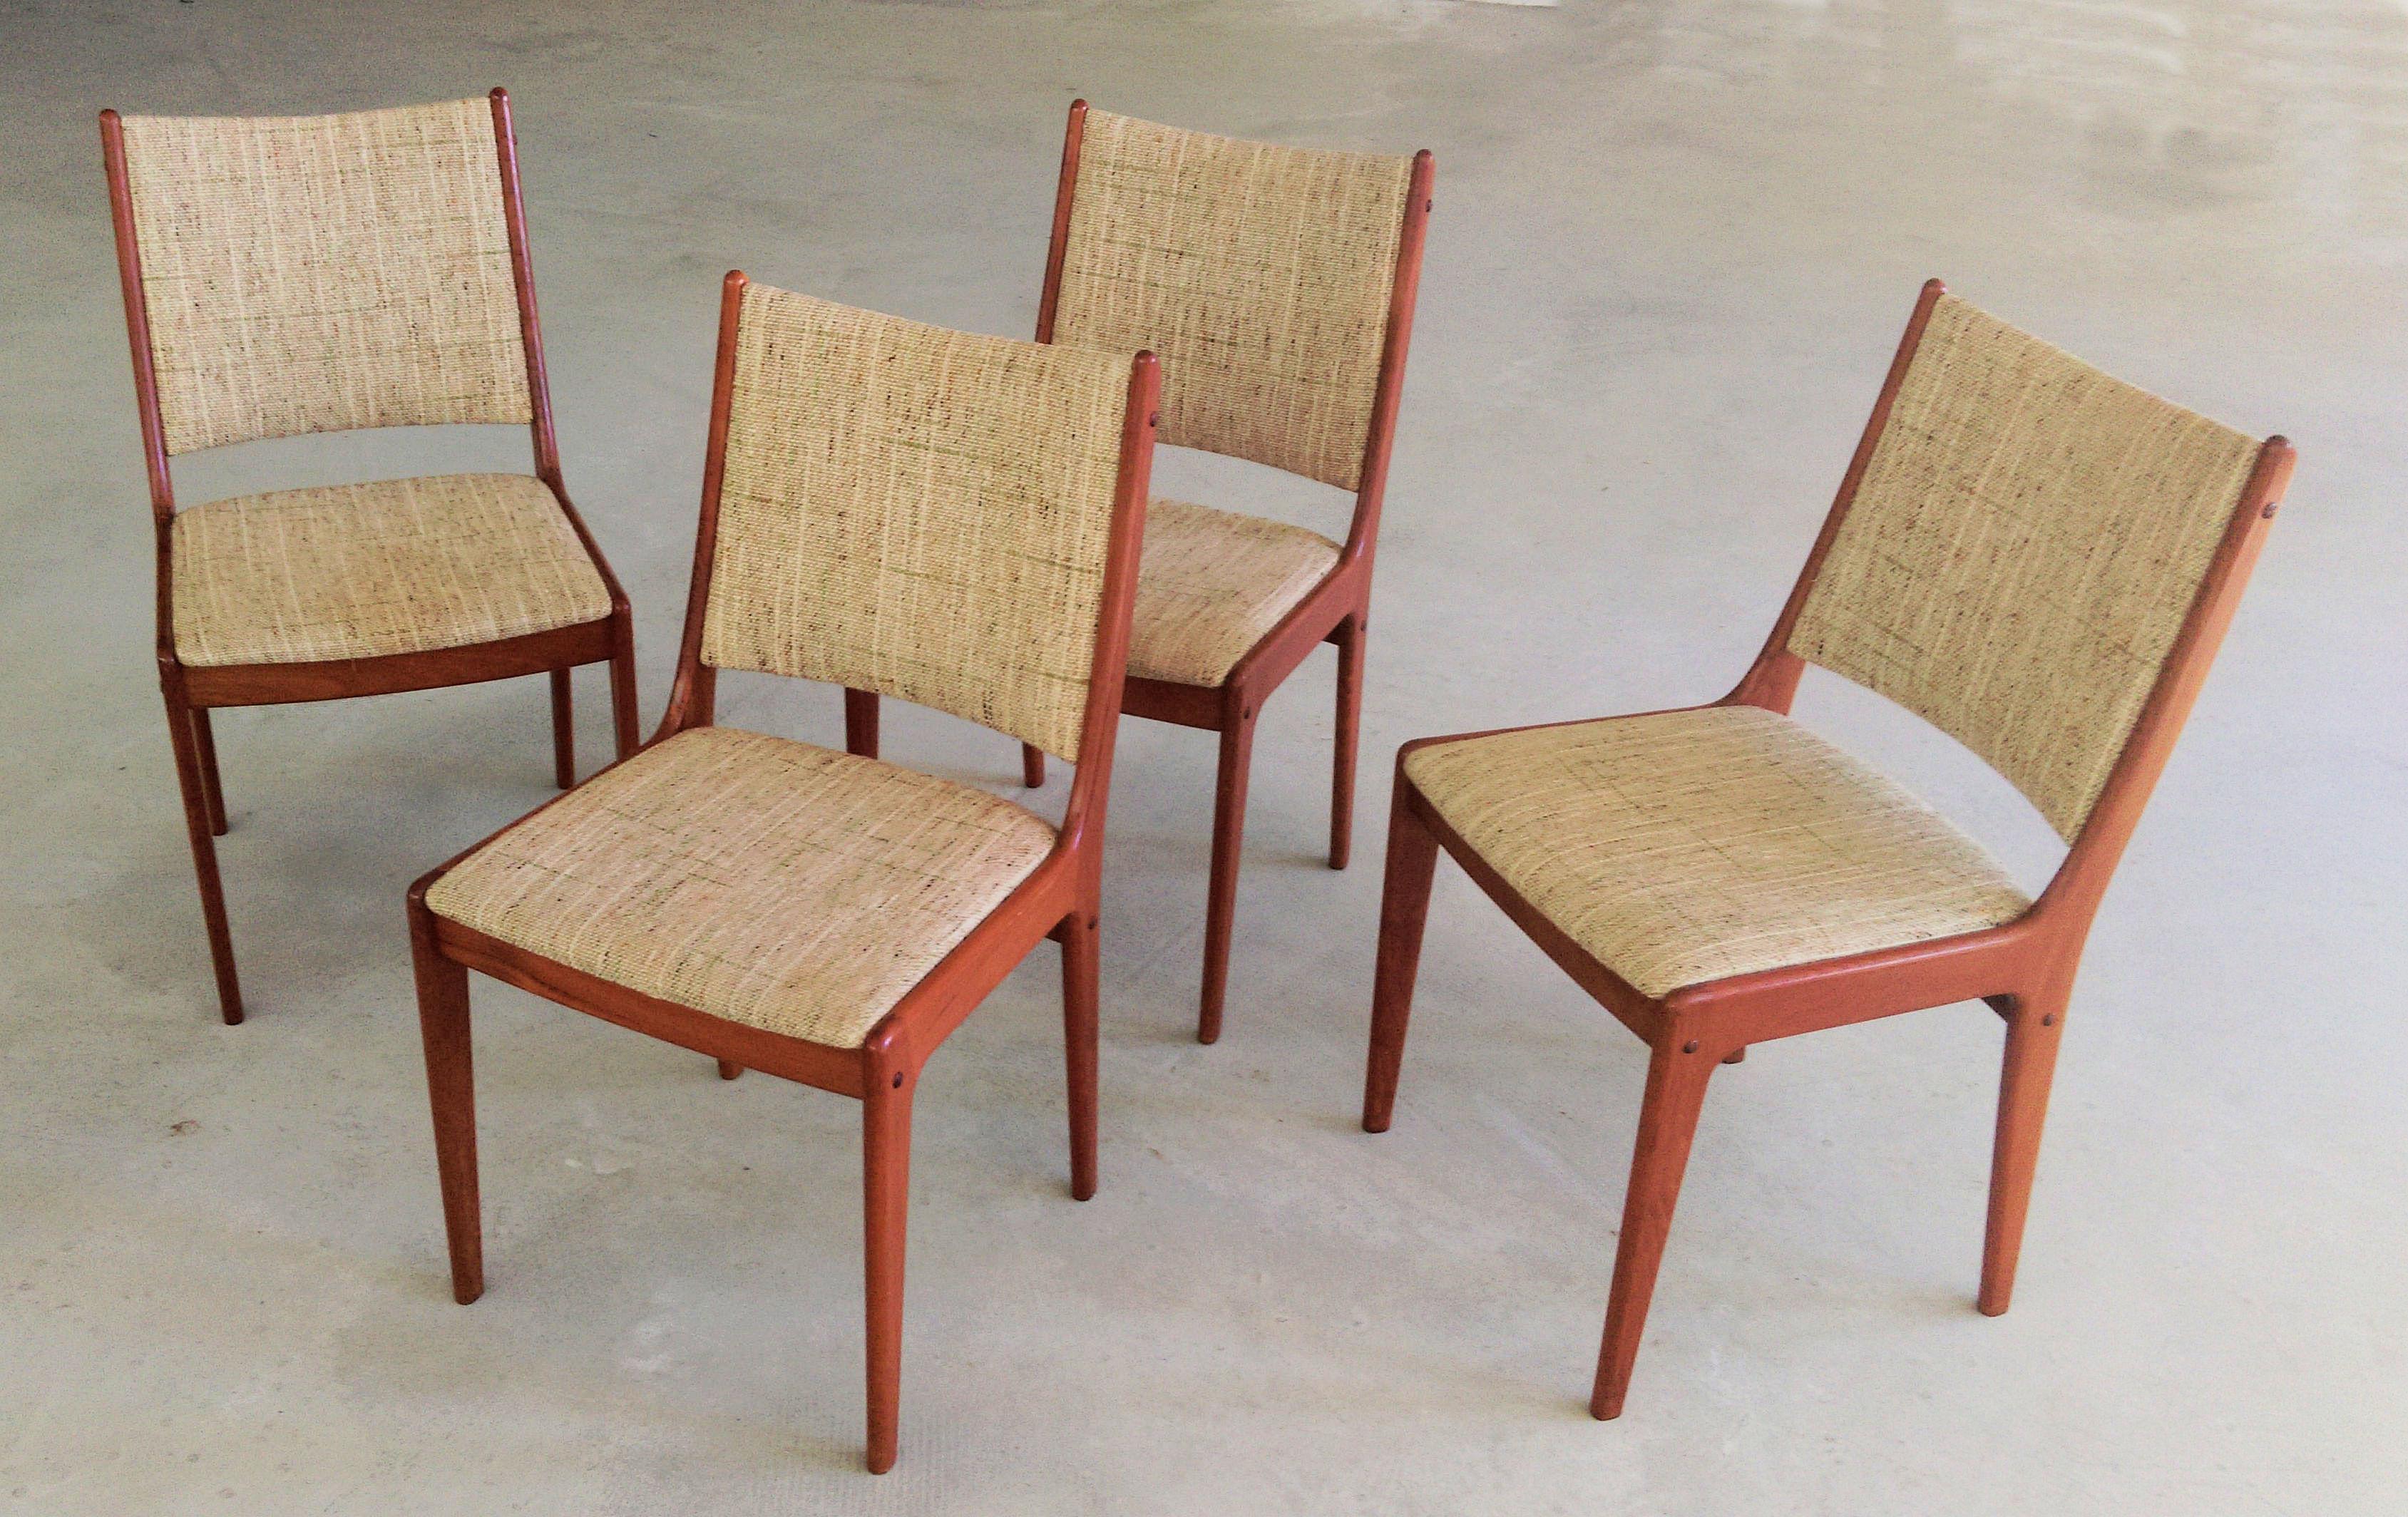 Set of four 1960s Johannes Andersen dining chairs in teak made by Uldum Møbler, Denmark.

The set of dining chairs feature a clean simple yet elegant design that will fit in well in most houses. 

The chairs have been restored and refinished by our